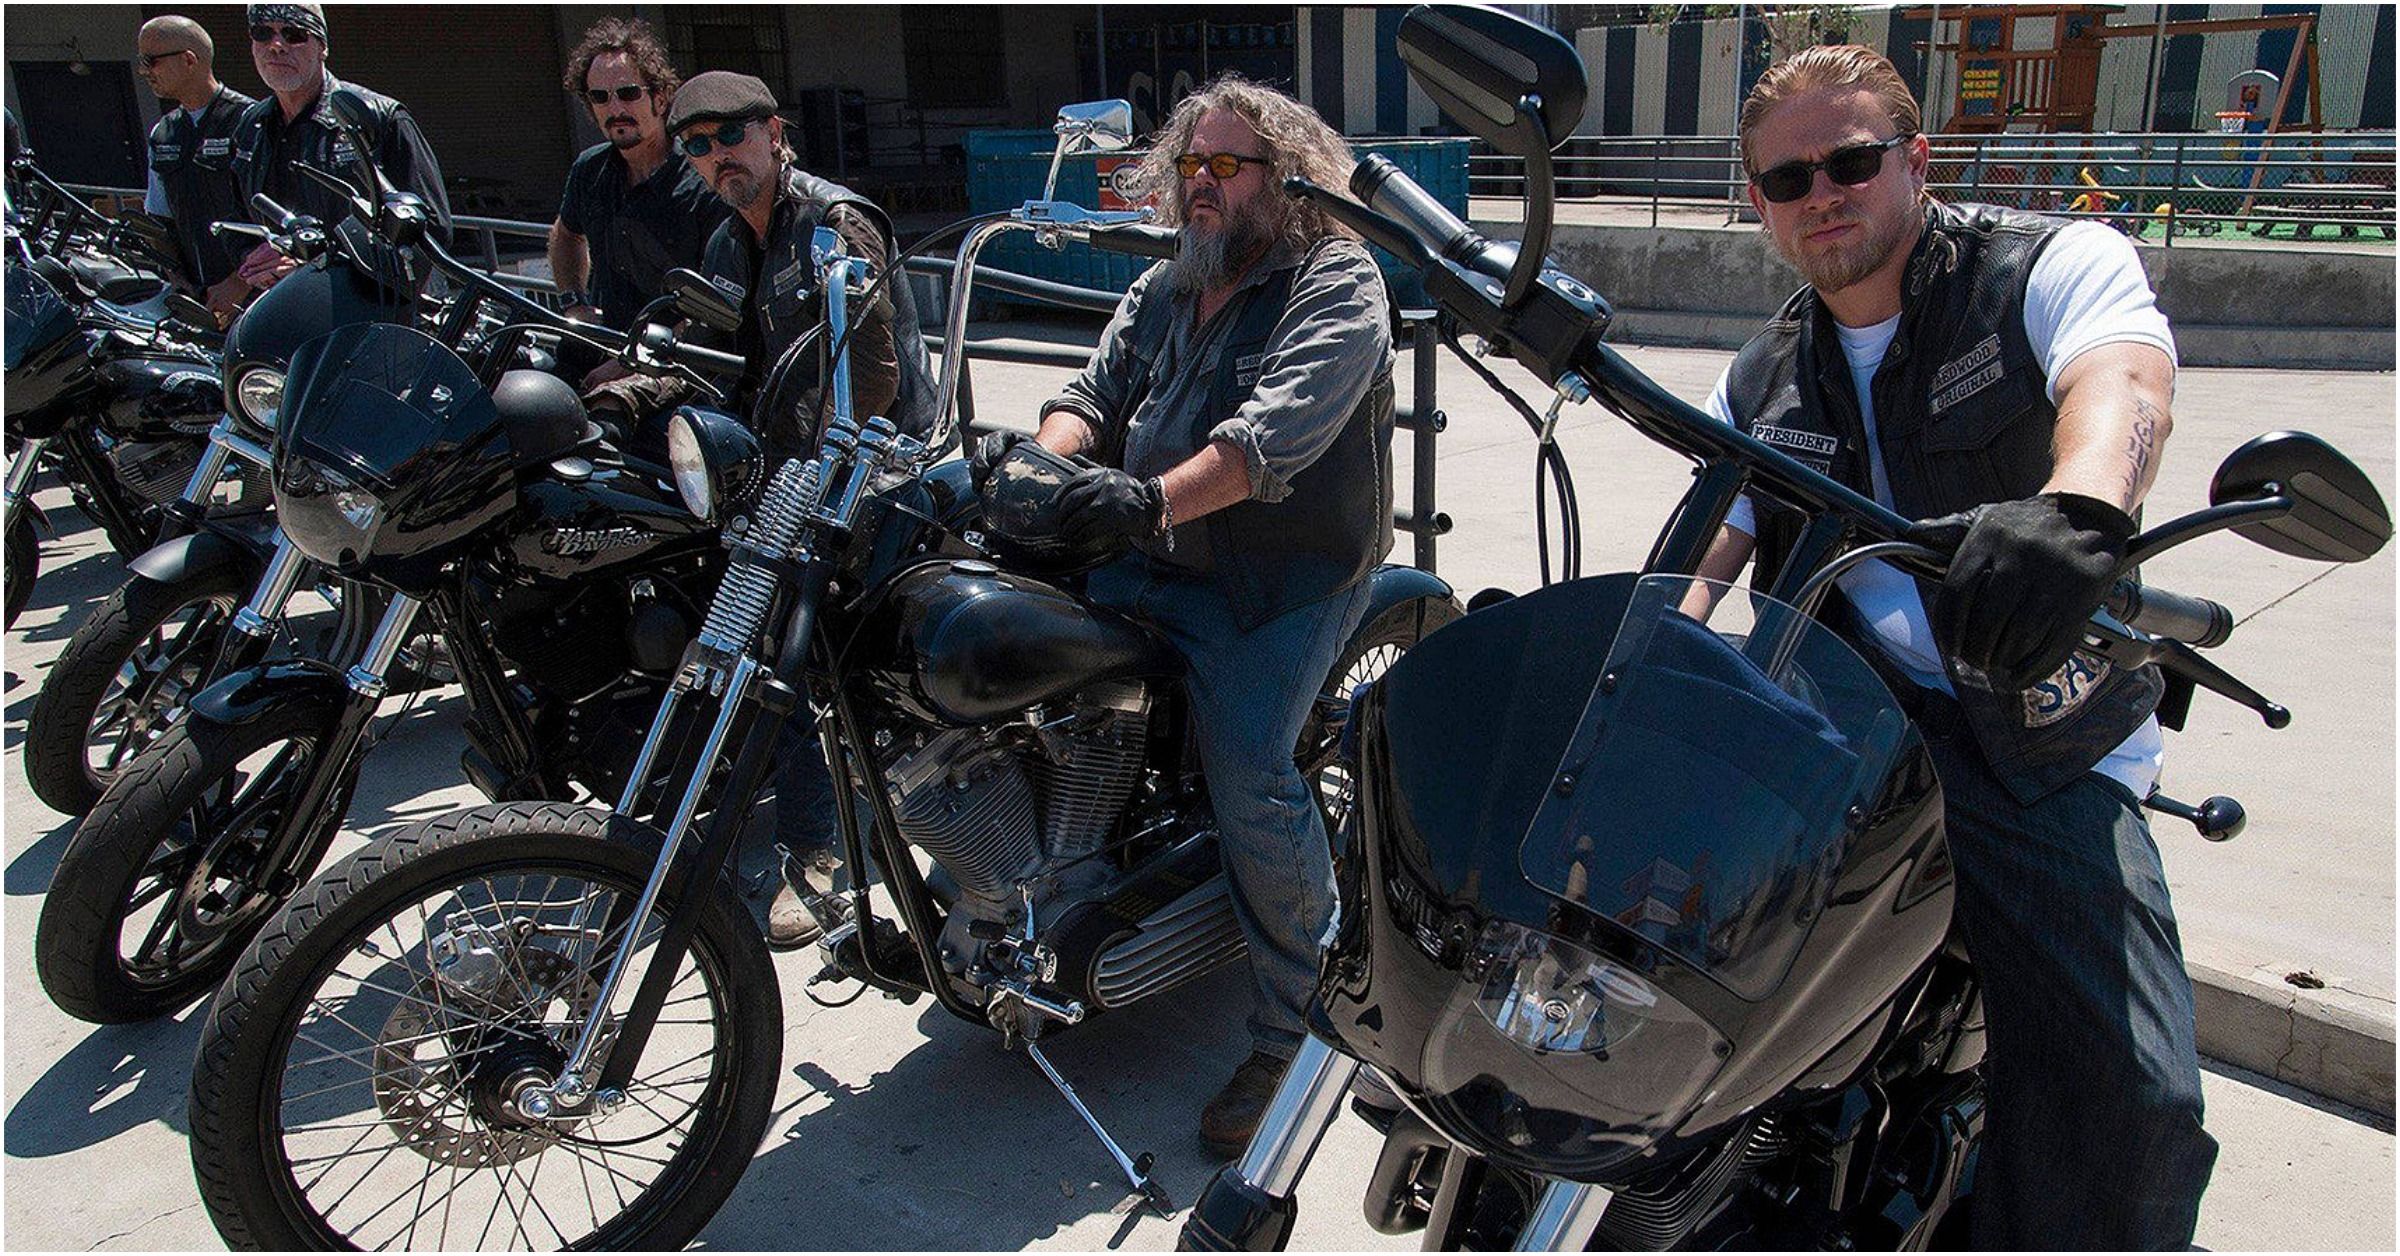 Sons Of Anarchy 15 Surprising Details About The Motorcycles Most Fans